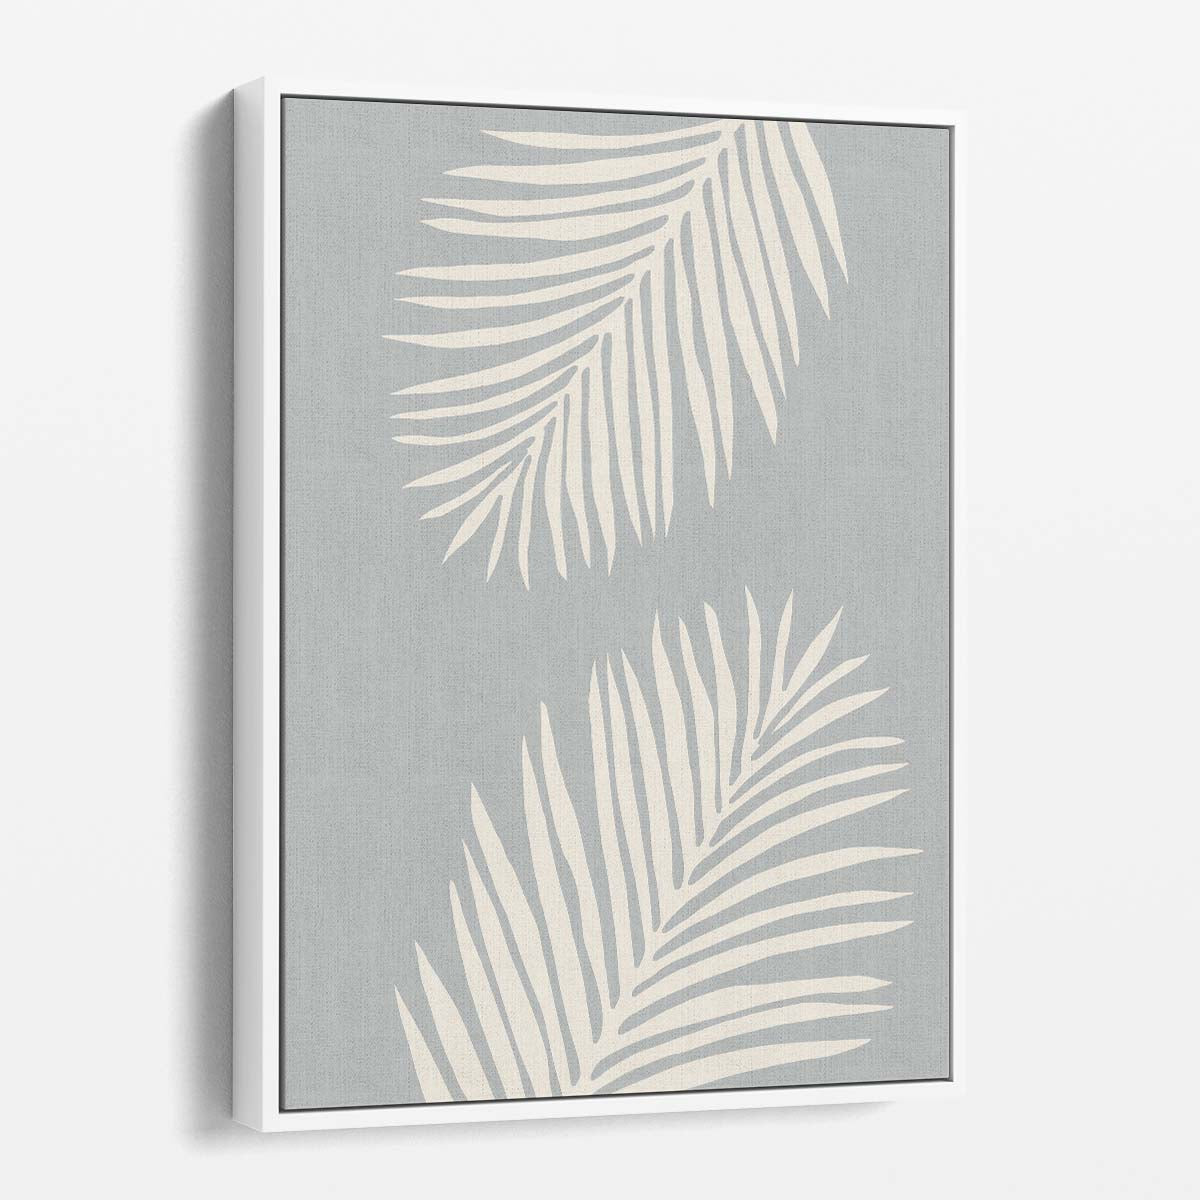 Botanical Palm Leaves Illustration Art with Beige, Grey Abstract Background by Luxuriance Designs, made in USA